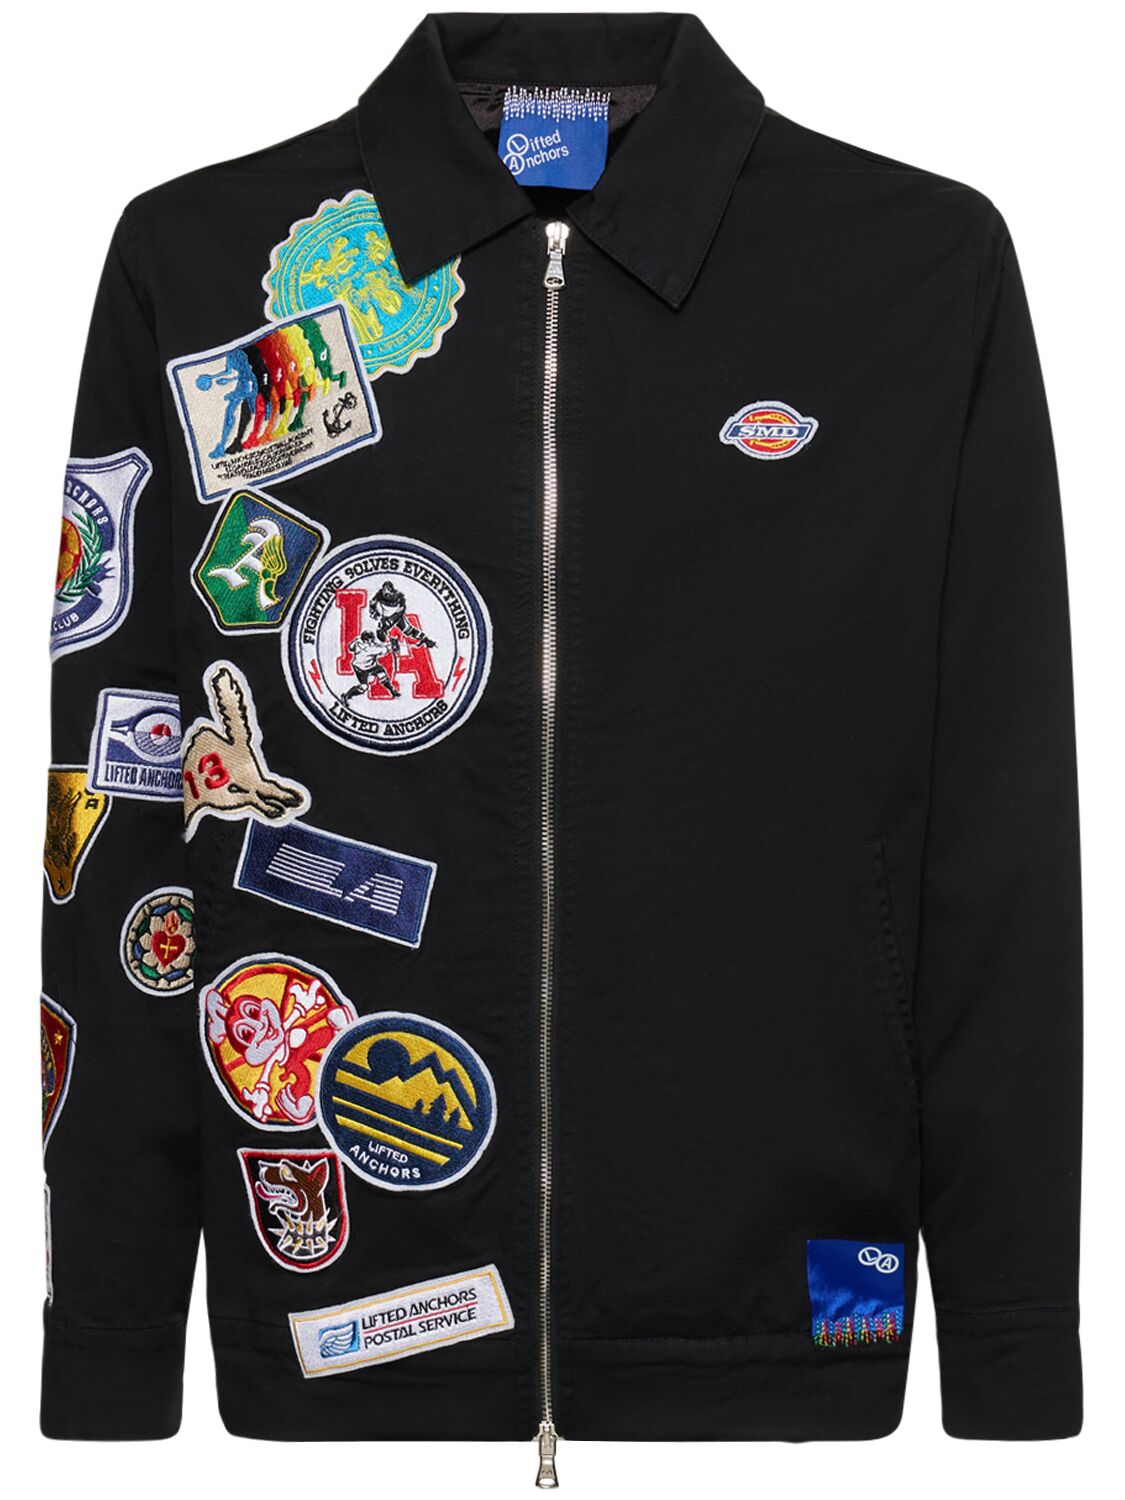 LIFTED ANCHORS Embroidered Light Zip-up Jacket